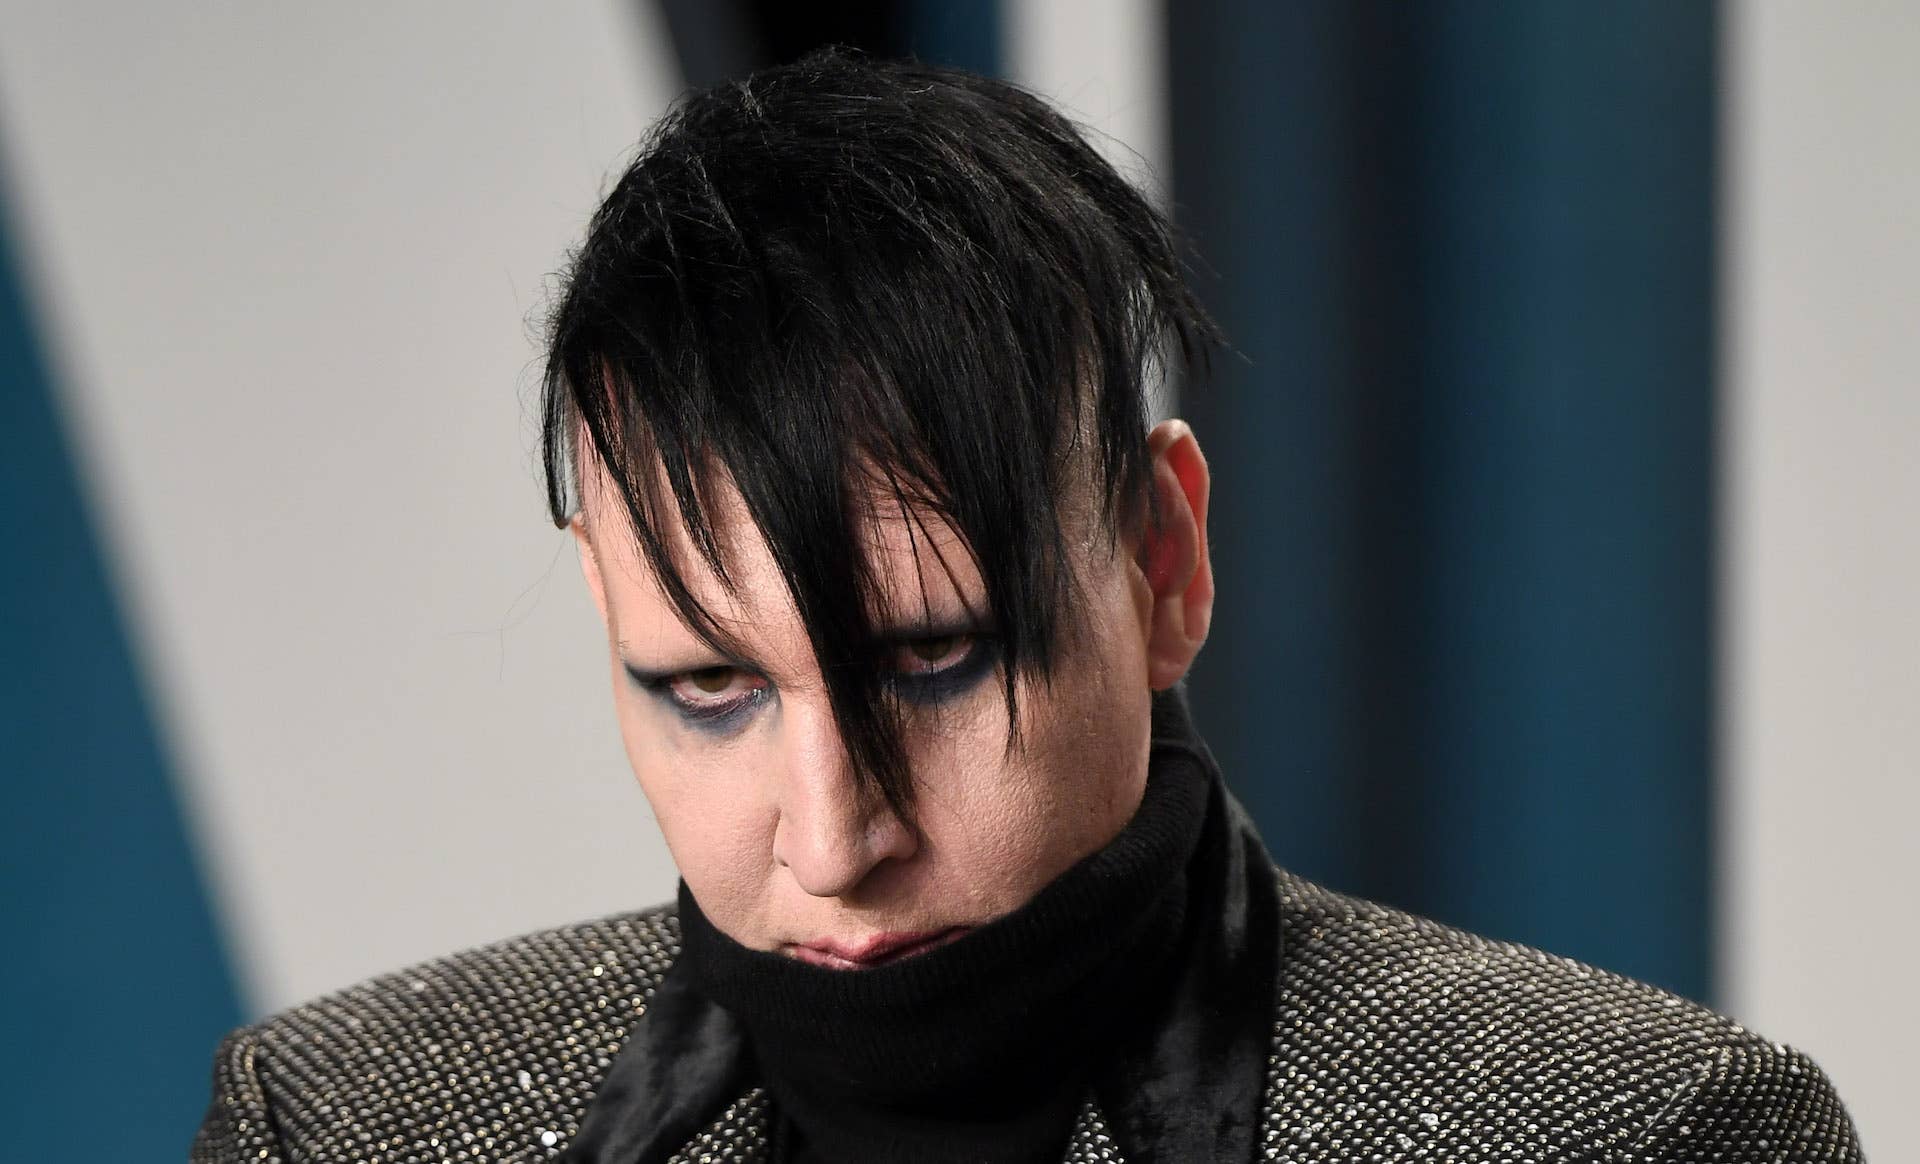 Marilyn Manson on a red carpet